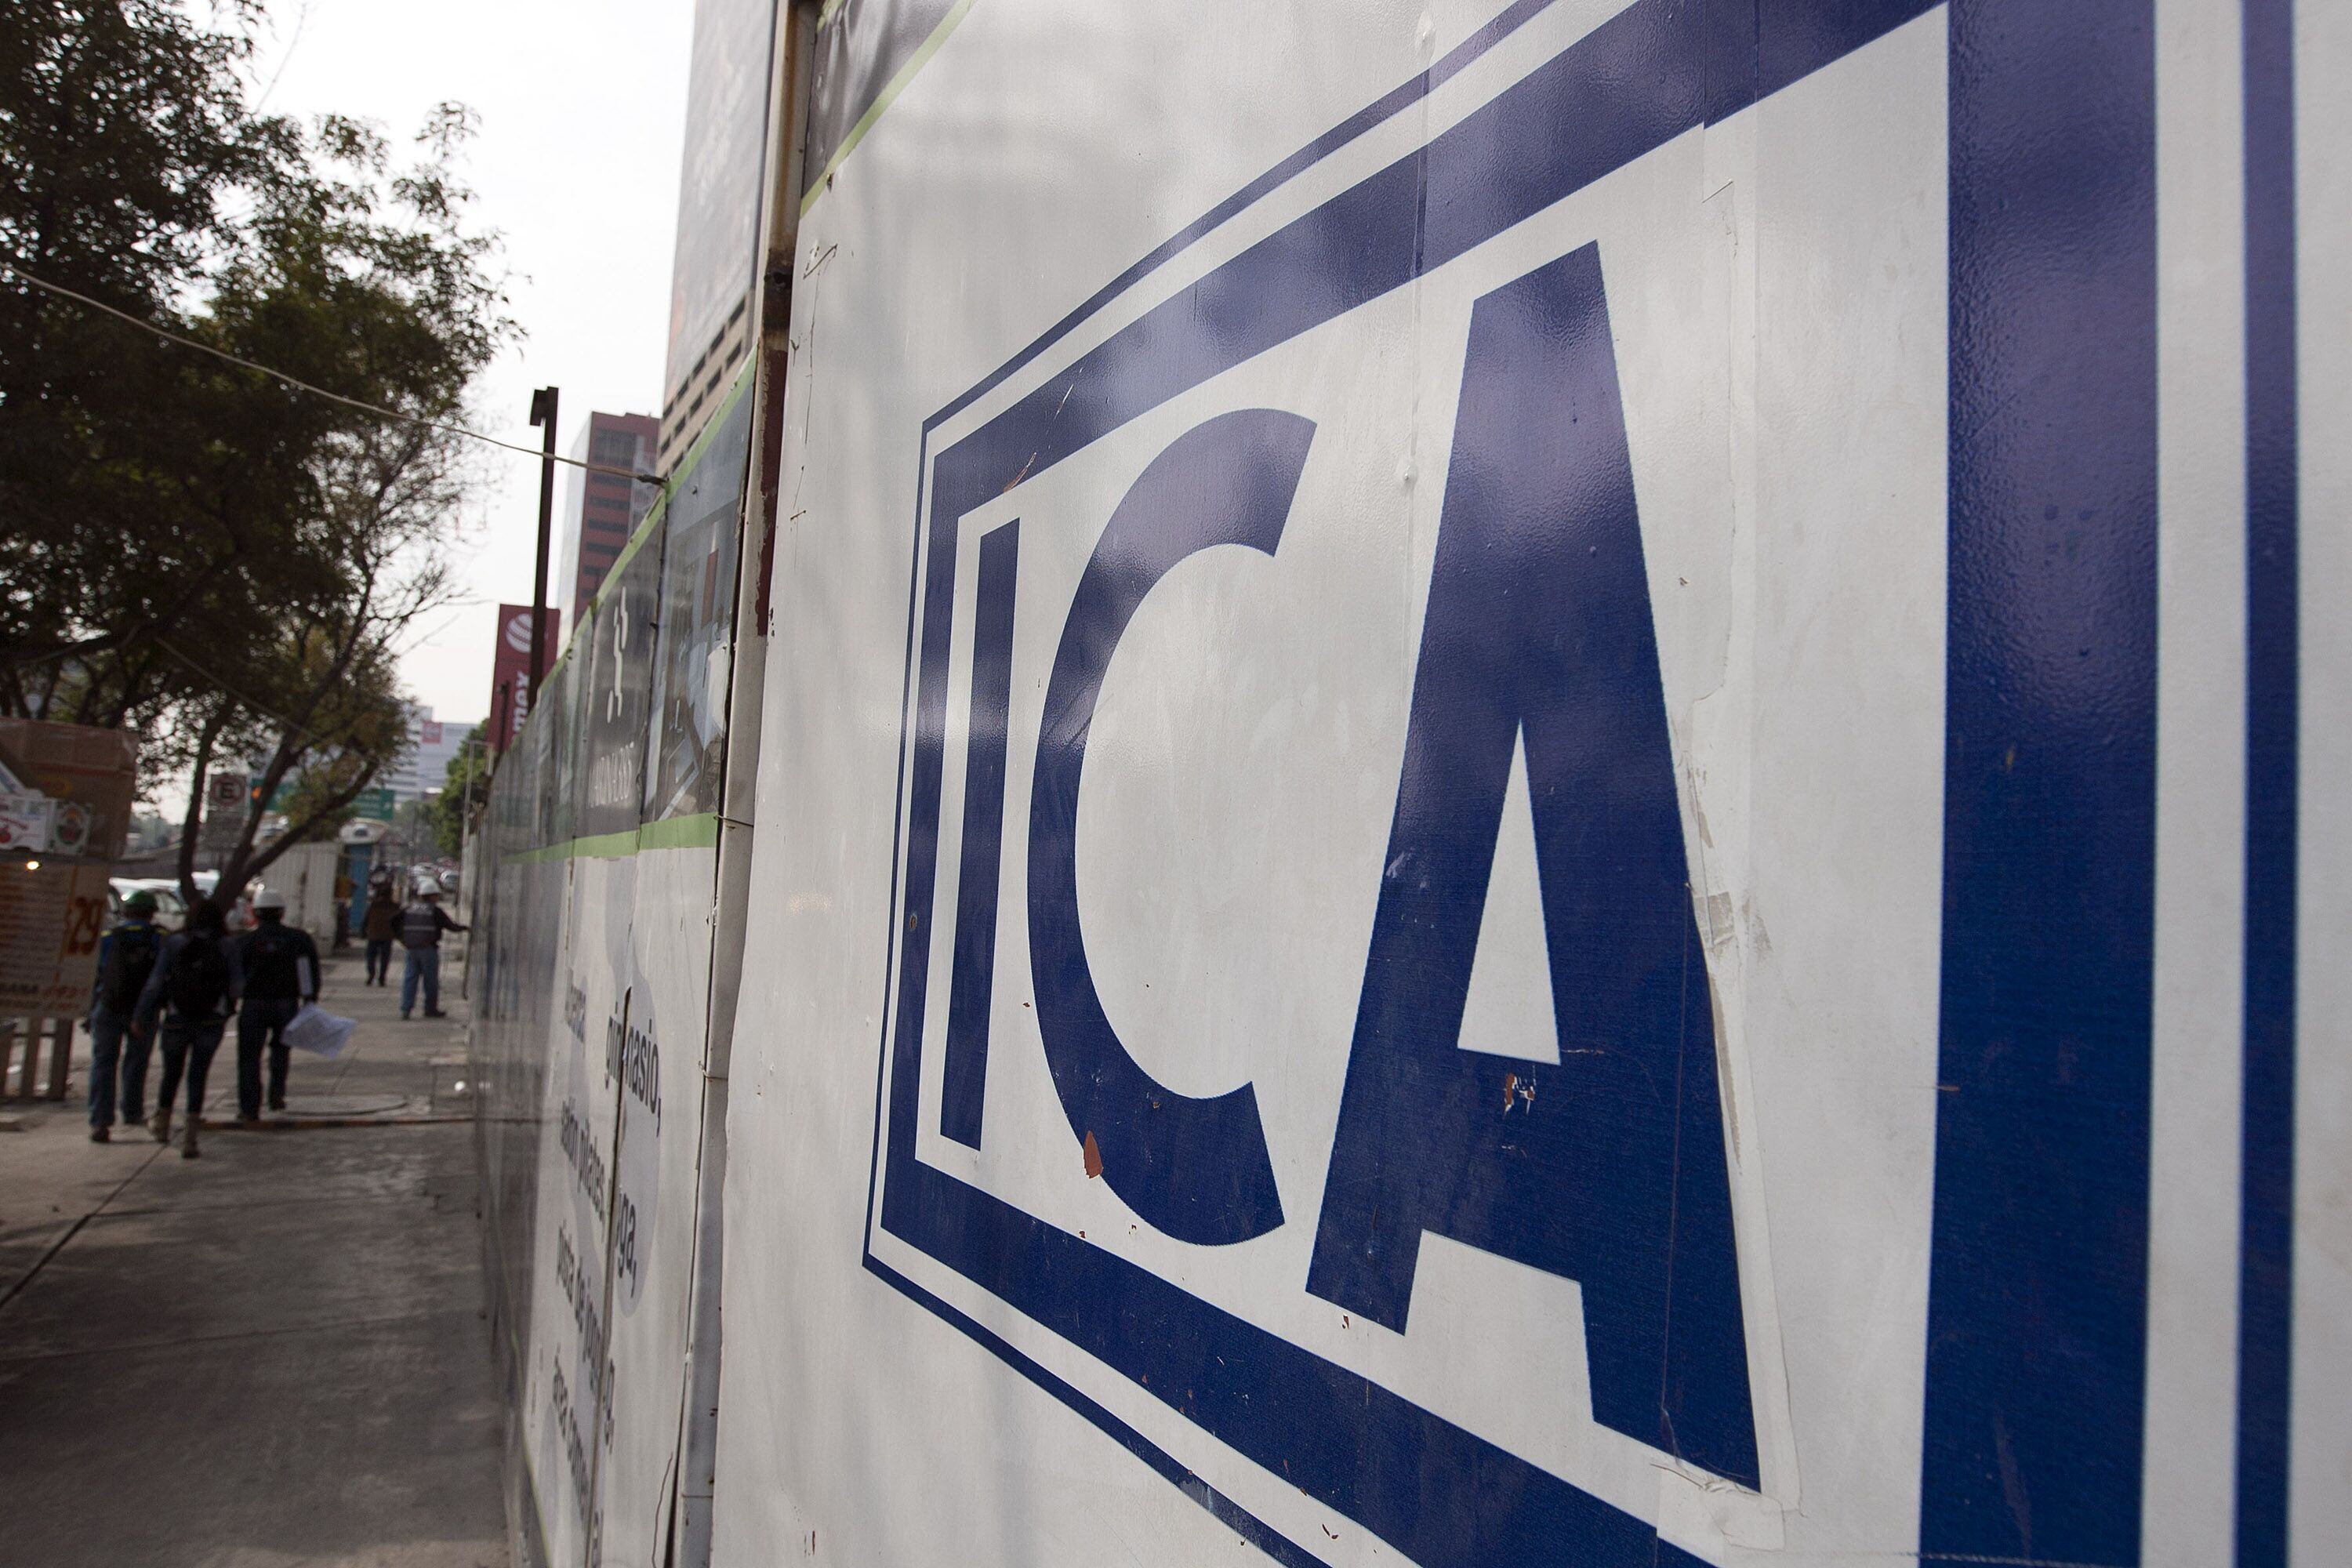 Mexico's ICA Changes Its Name to Inanis Sociedad as Its Shares